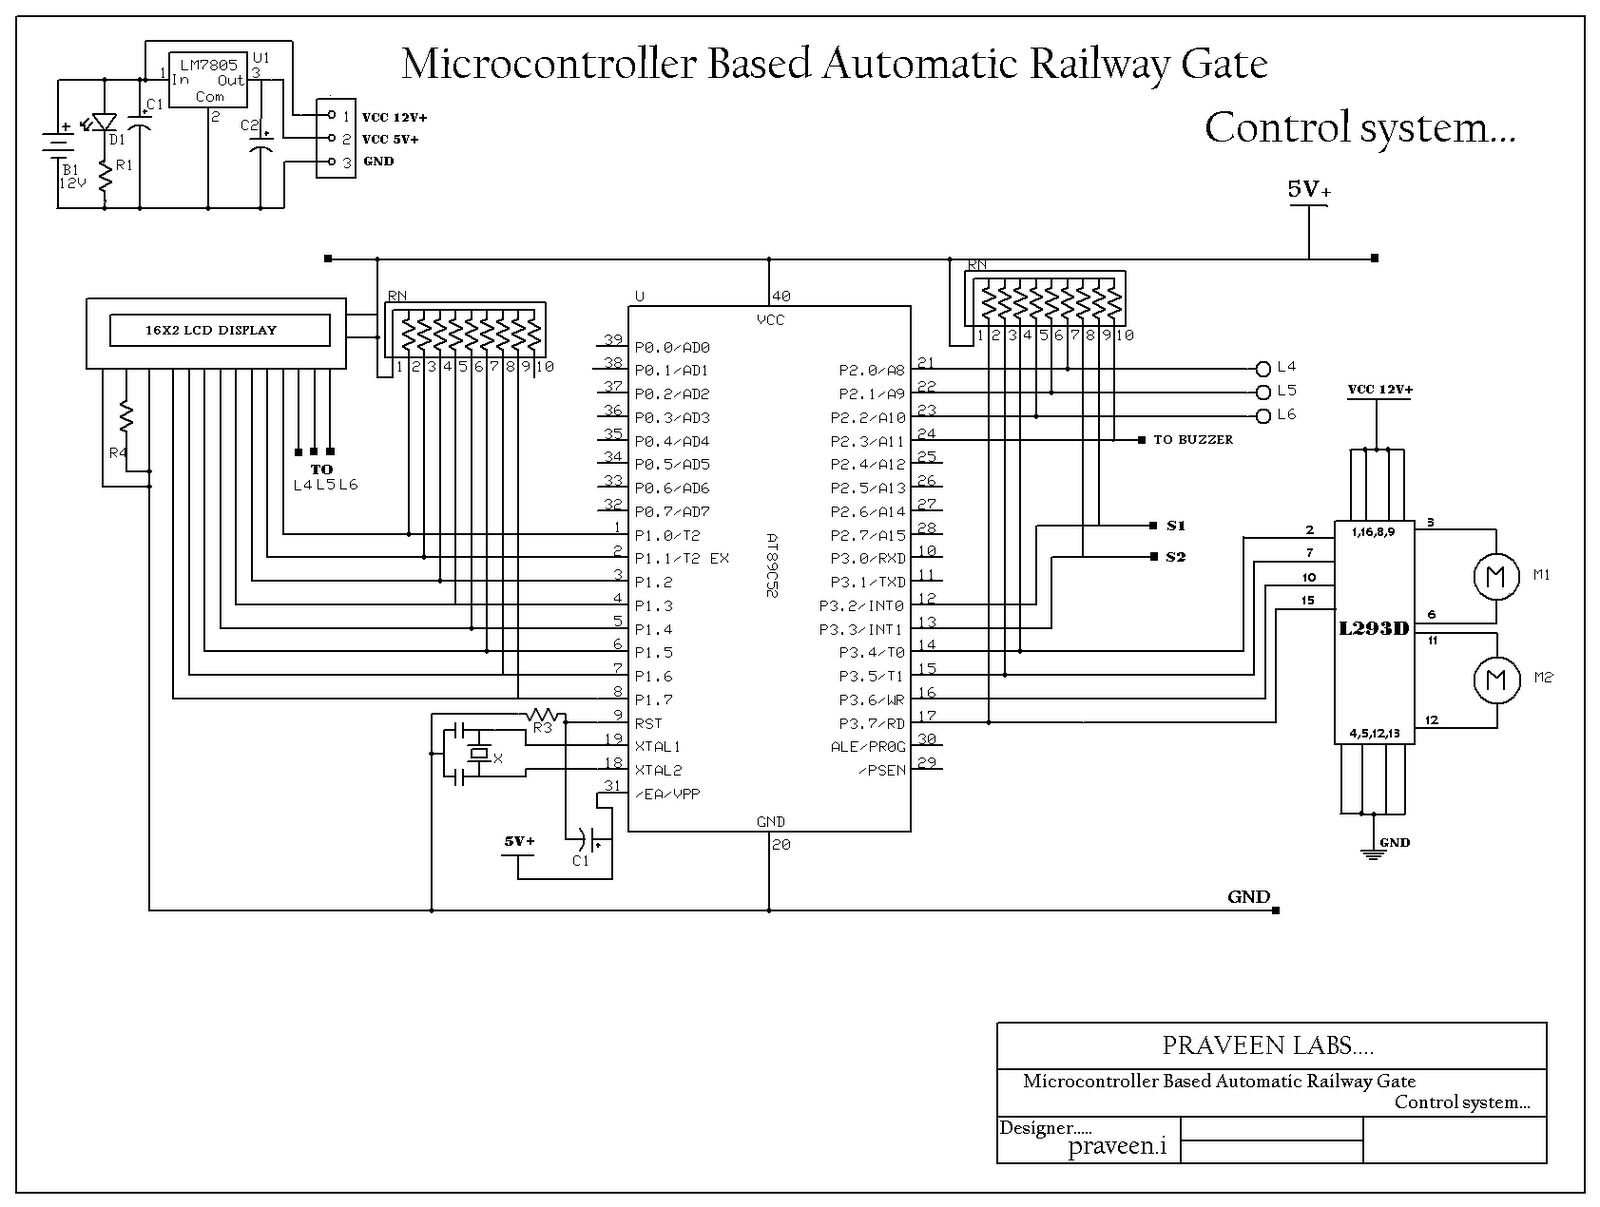 Electrical and Electronics: Microcontroller Based Automatic Railway